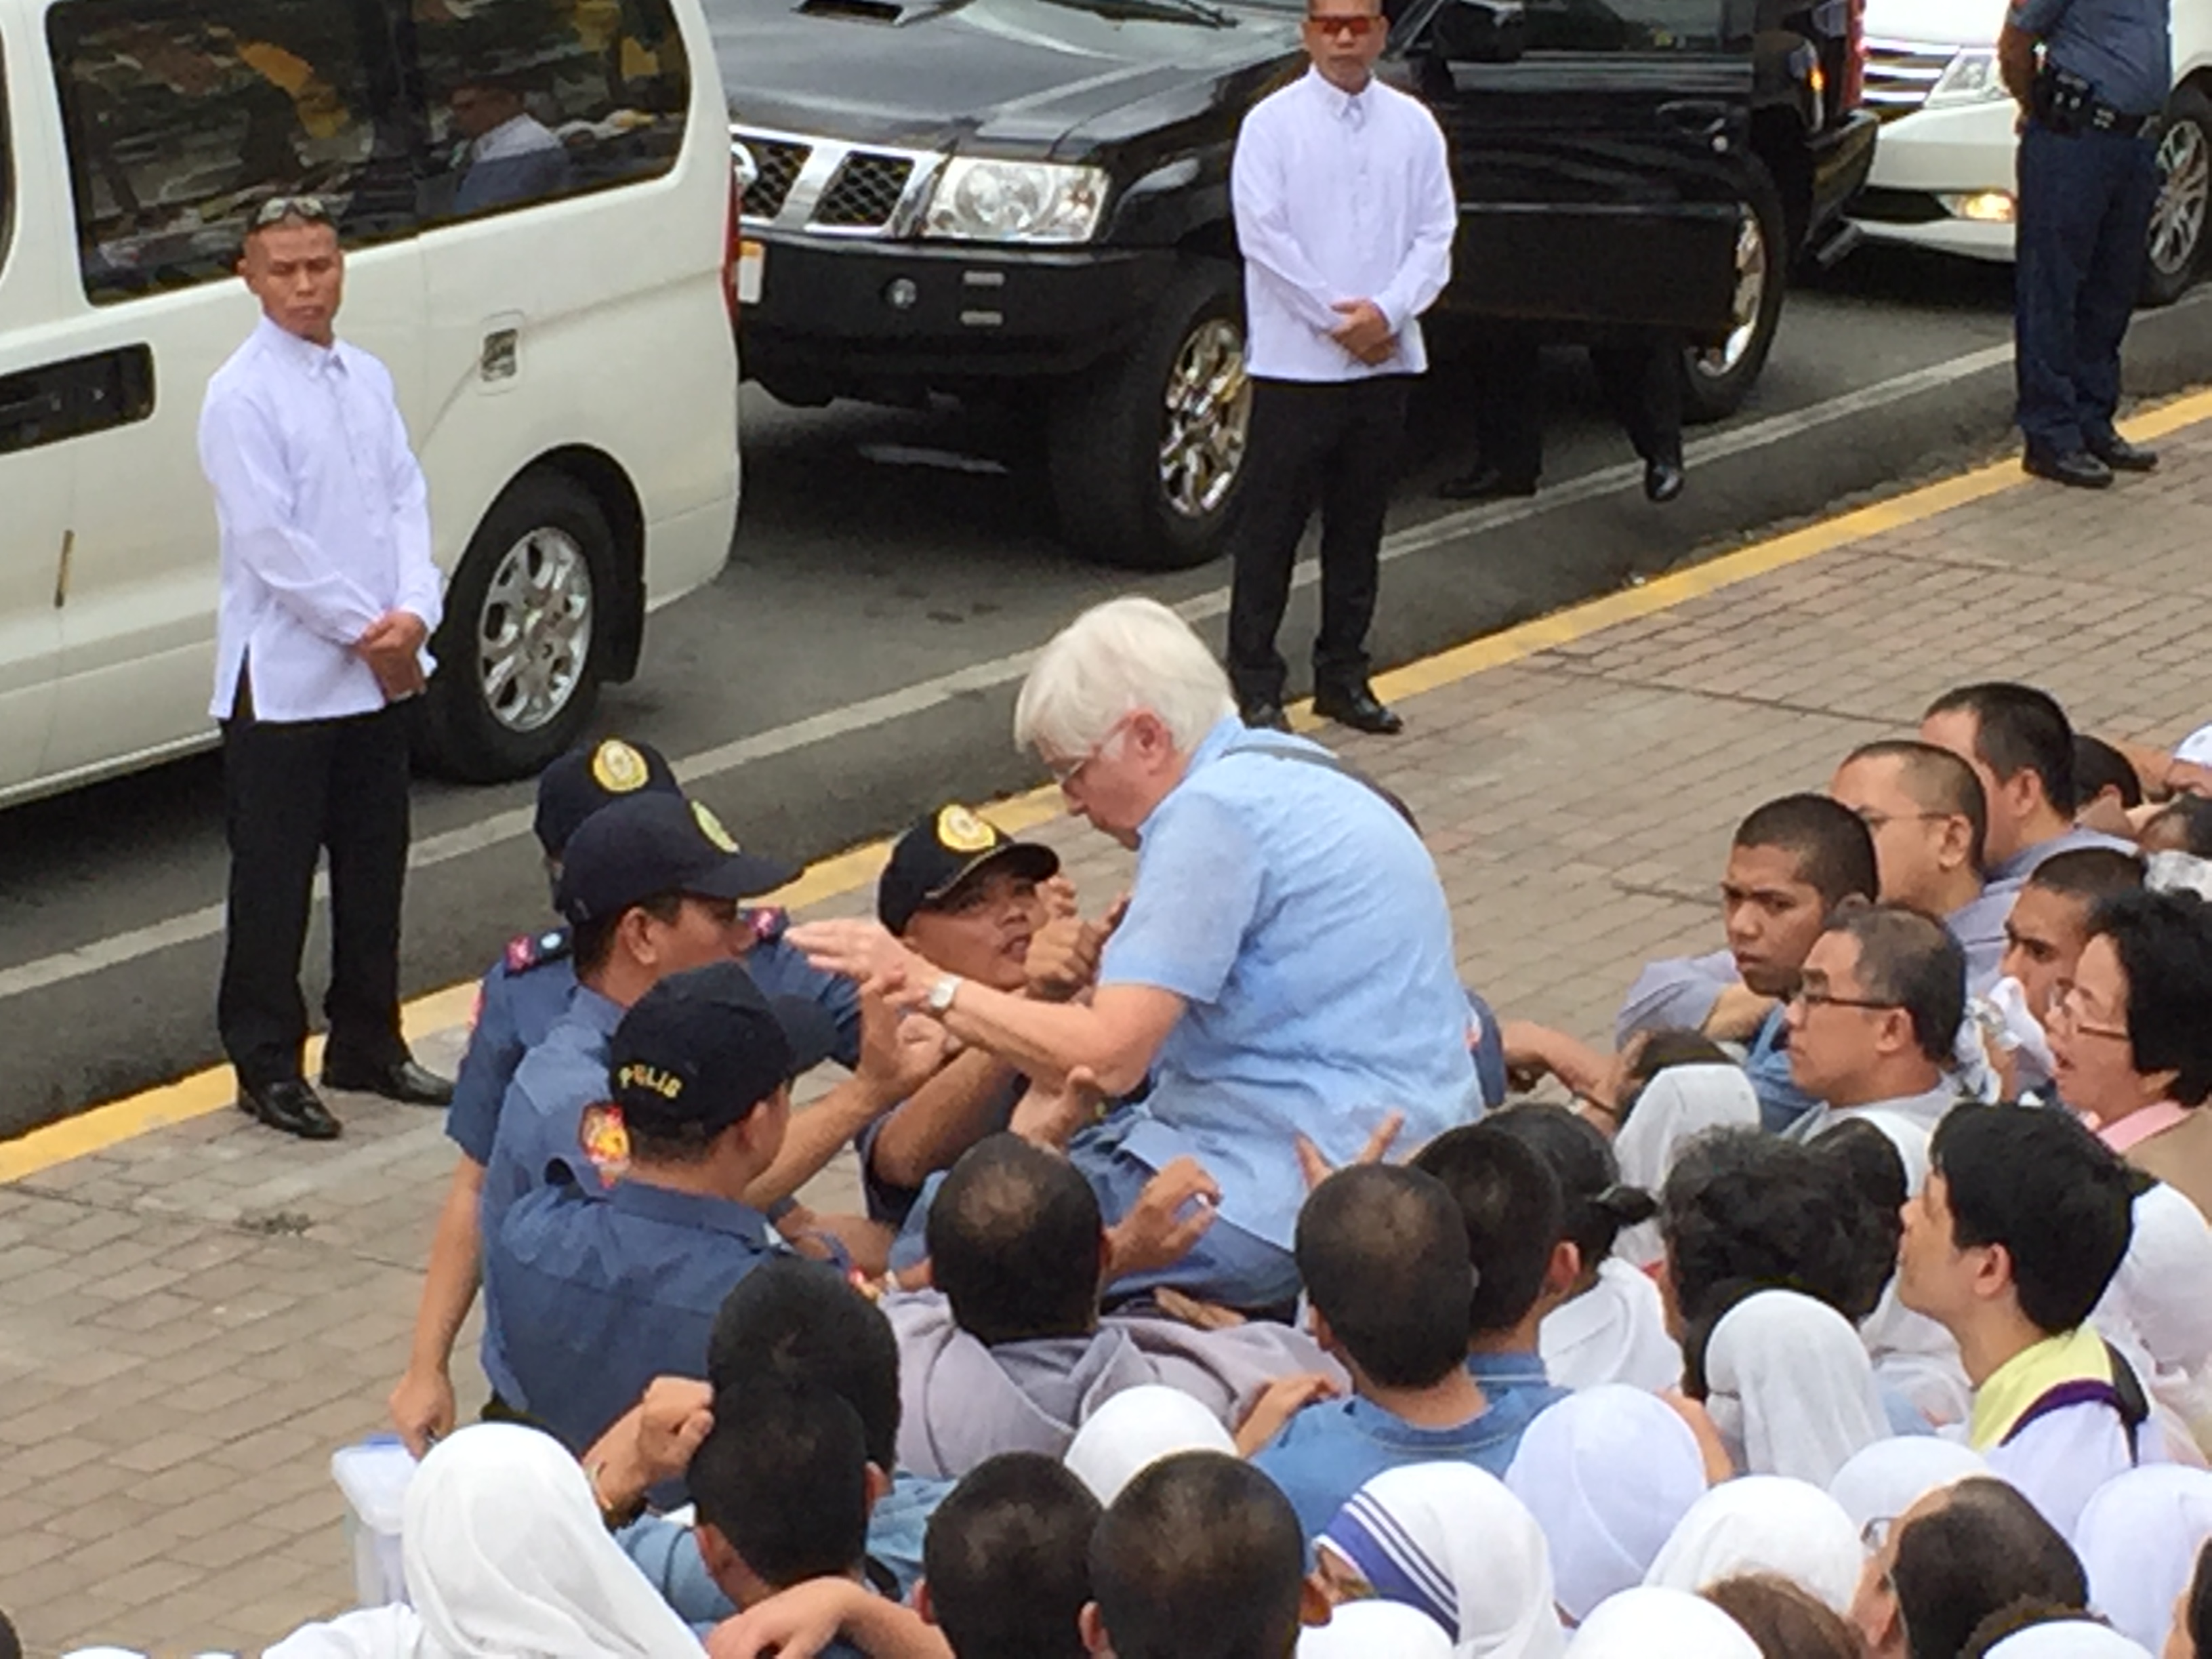 Policemen assist an elderly woman during one of the papal events in Manila. TETCH TORRES-TUPAS